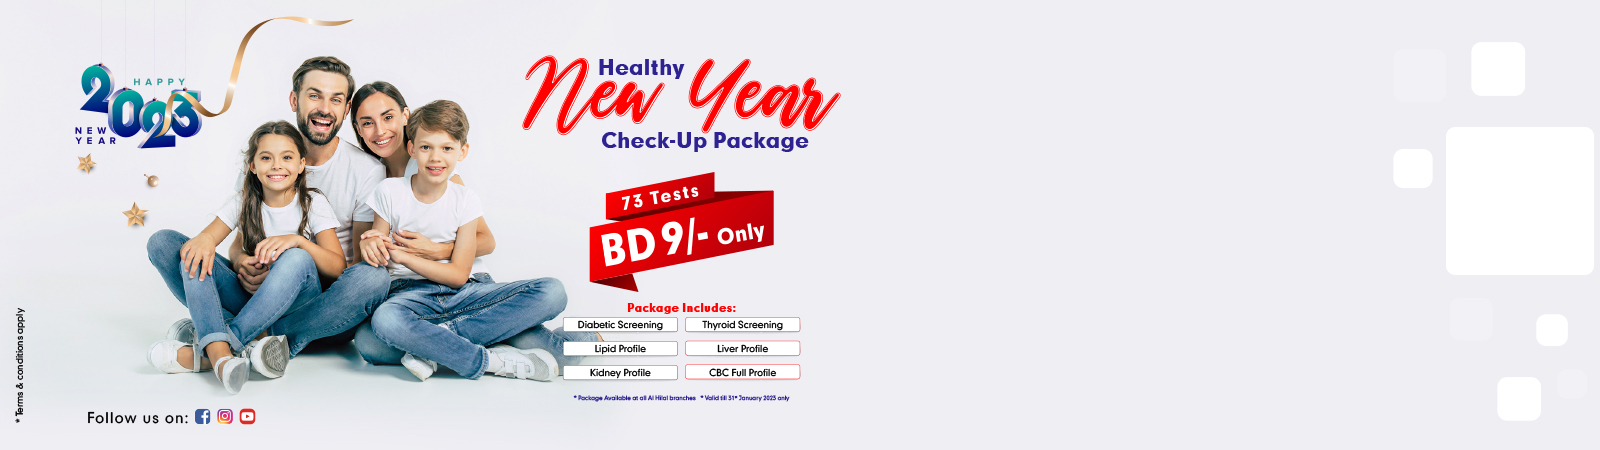 ALH-Website-Banner-New-Year-Package-1600-x-450